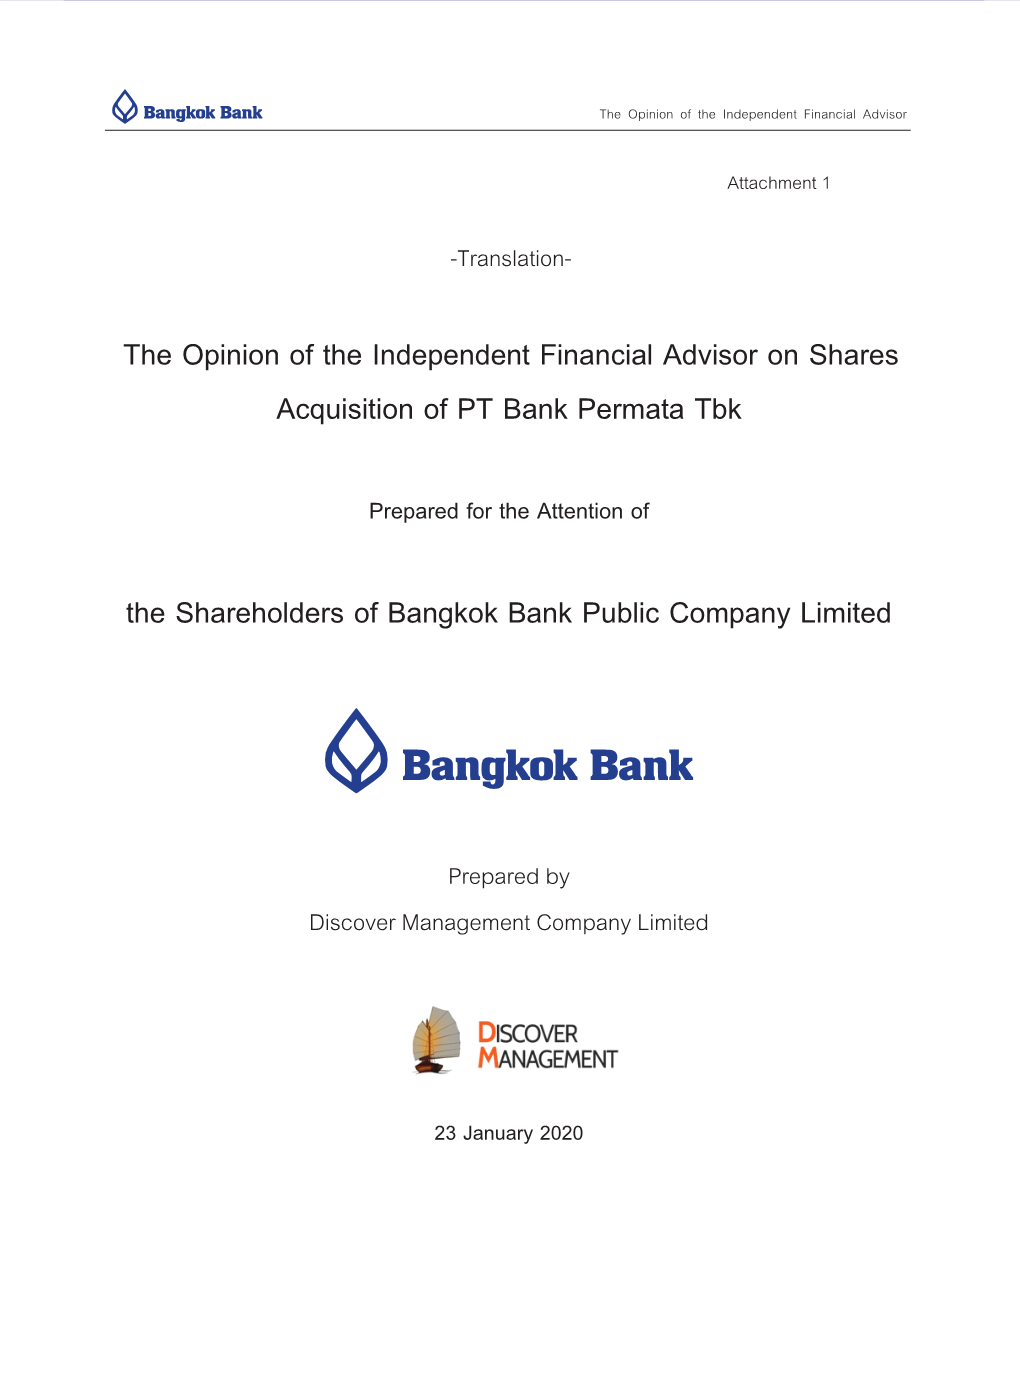 The Opinion of the Independent Financial Advisor on Shares Acquisition of PT Bank Permata Tbk